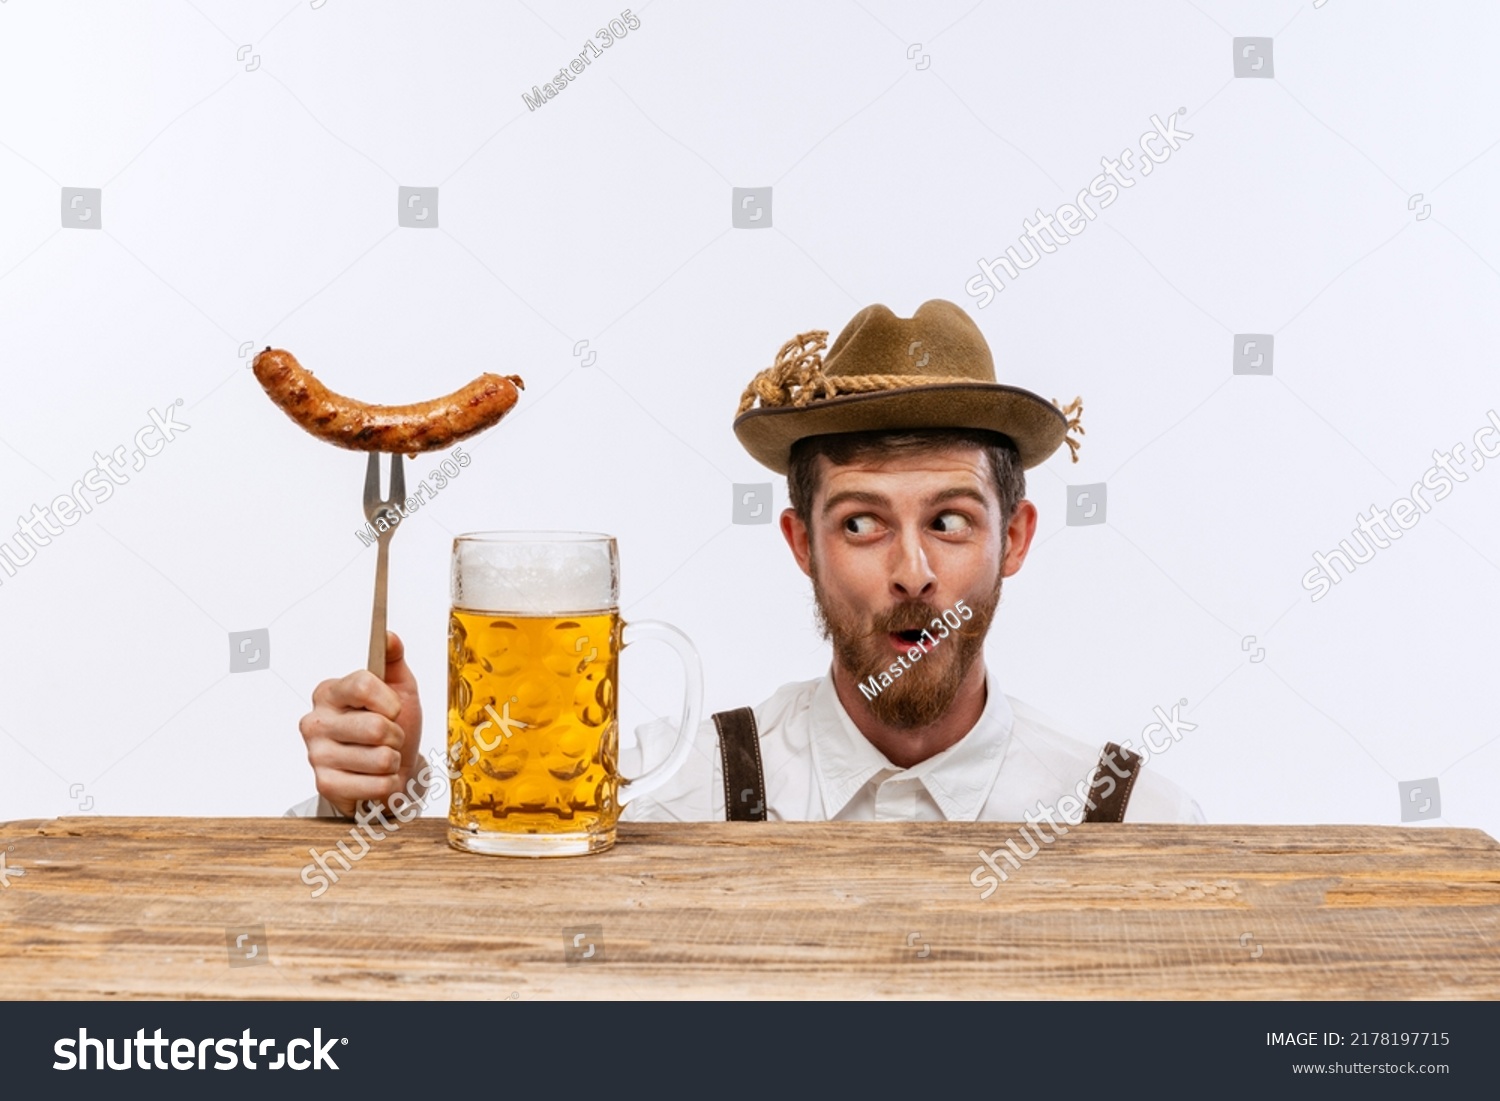 Wow. Happy man wearing traditional fest Bavarian or German outfit with big beer glass and fried sausage celebrating Oktoberfest. Alcohol, traditions, holidays, taste concept. Copy space for ad #2178197715